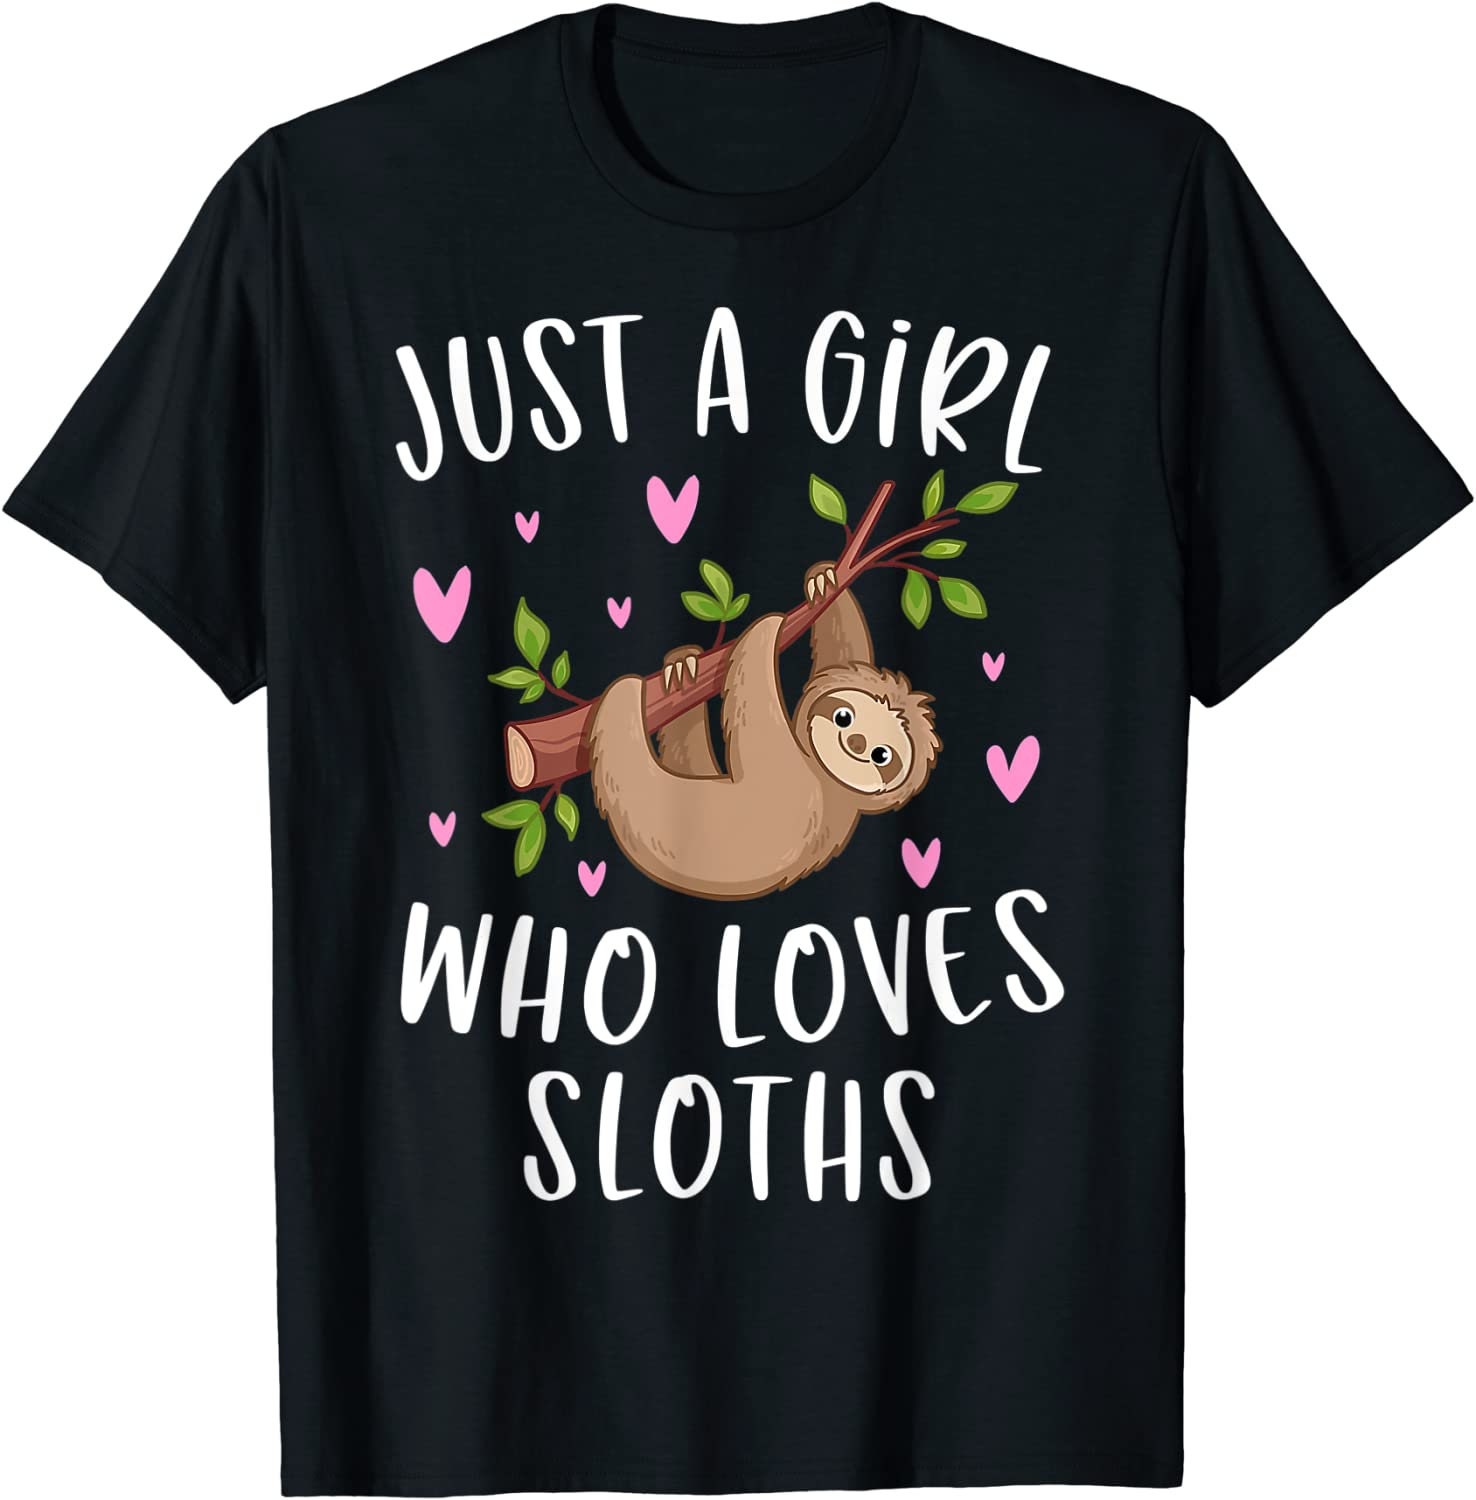 Discover Cute Sloth Shirt For Girls Just A Girl Who Loves Sloths T-Shirt